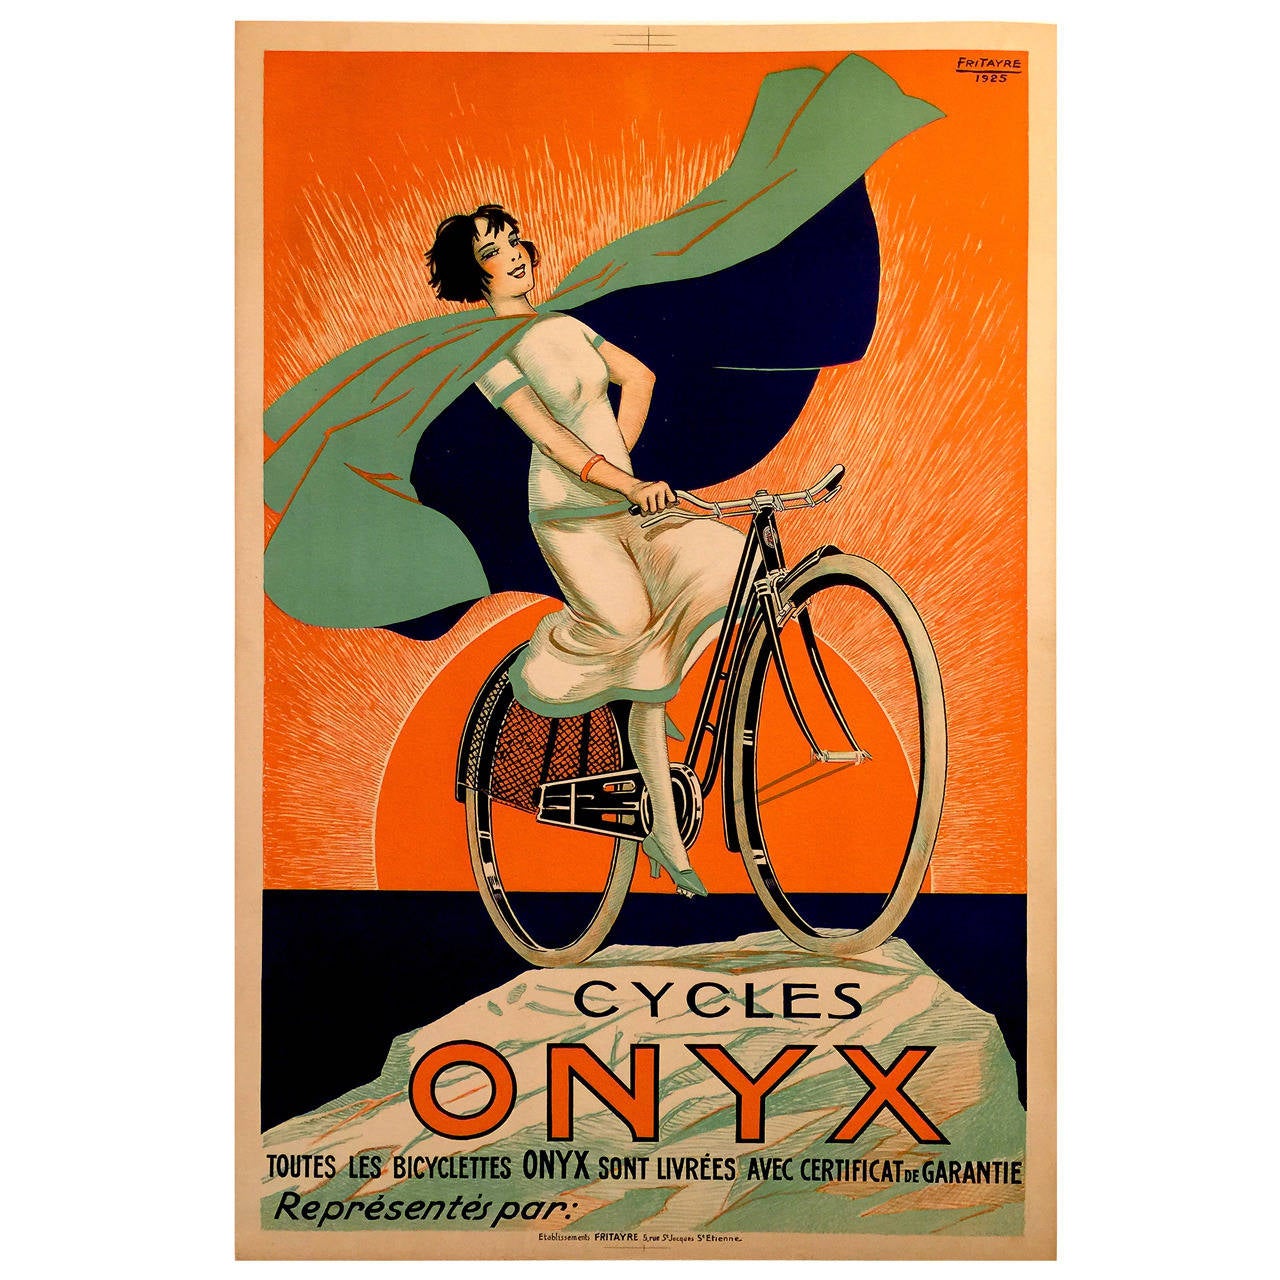 Art Deco Period French Advertising Poster for Cycles Onyx by Fritayre, 1925 For Sale at 1stdibs